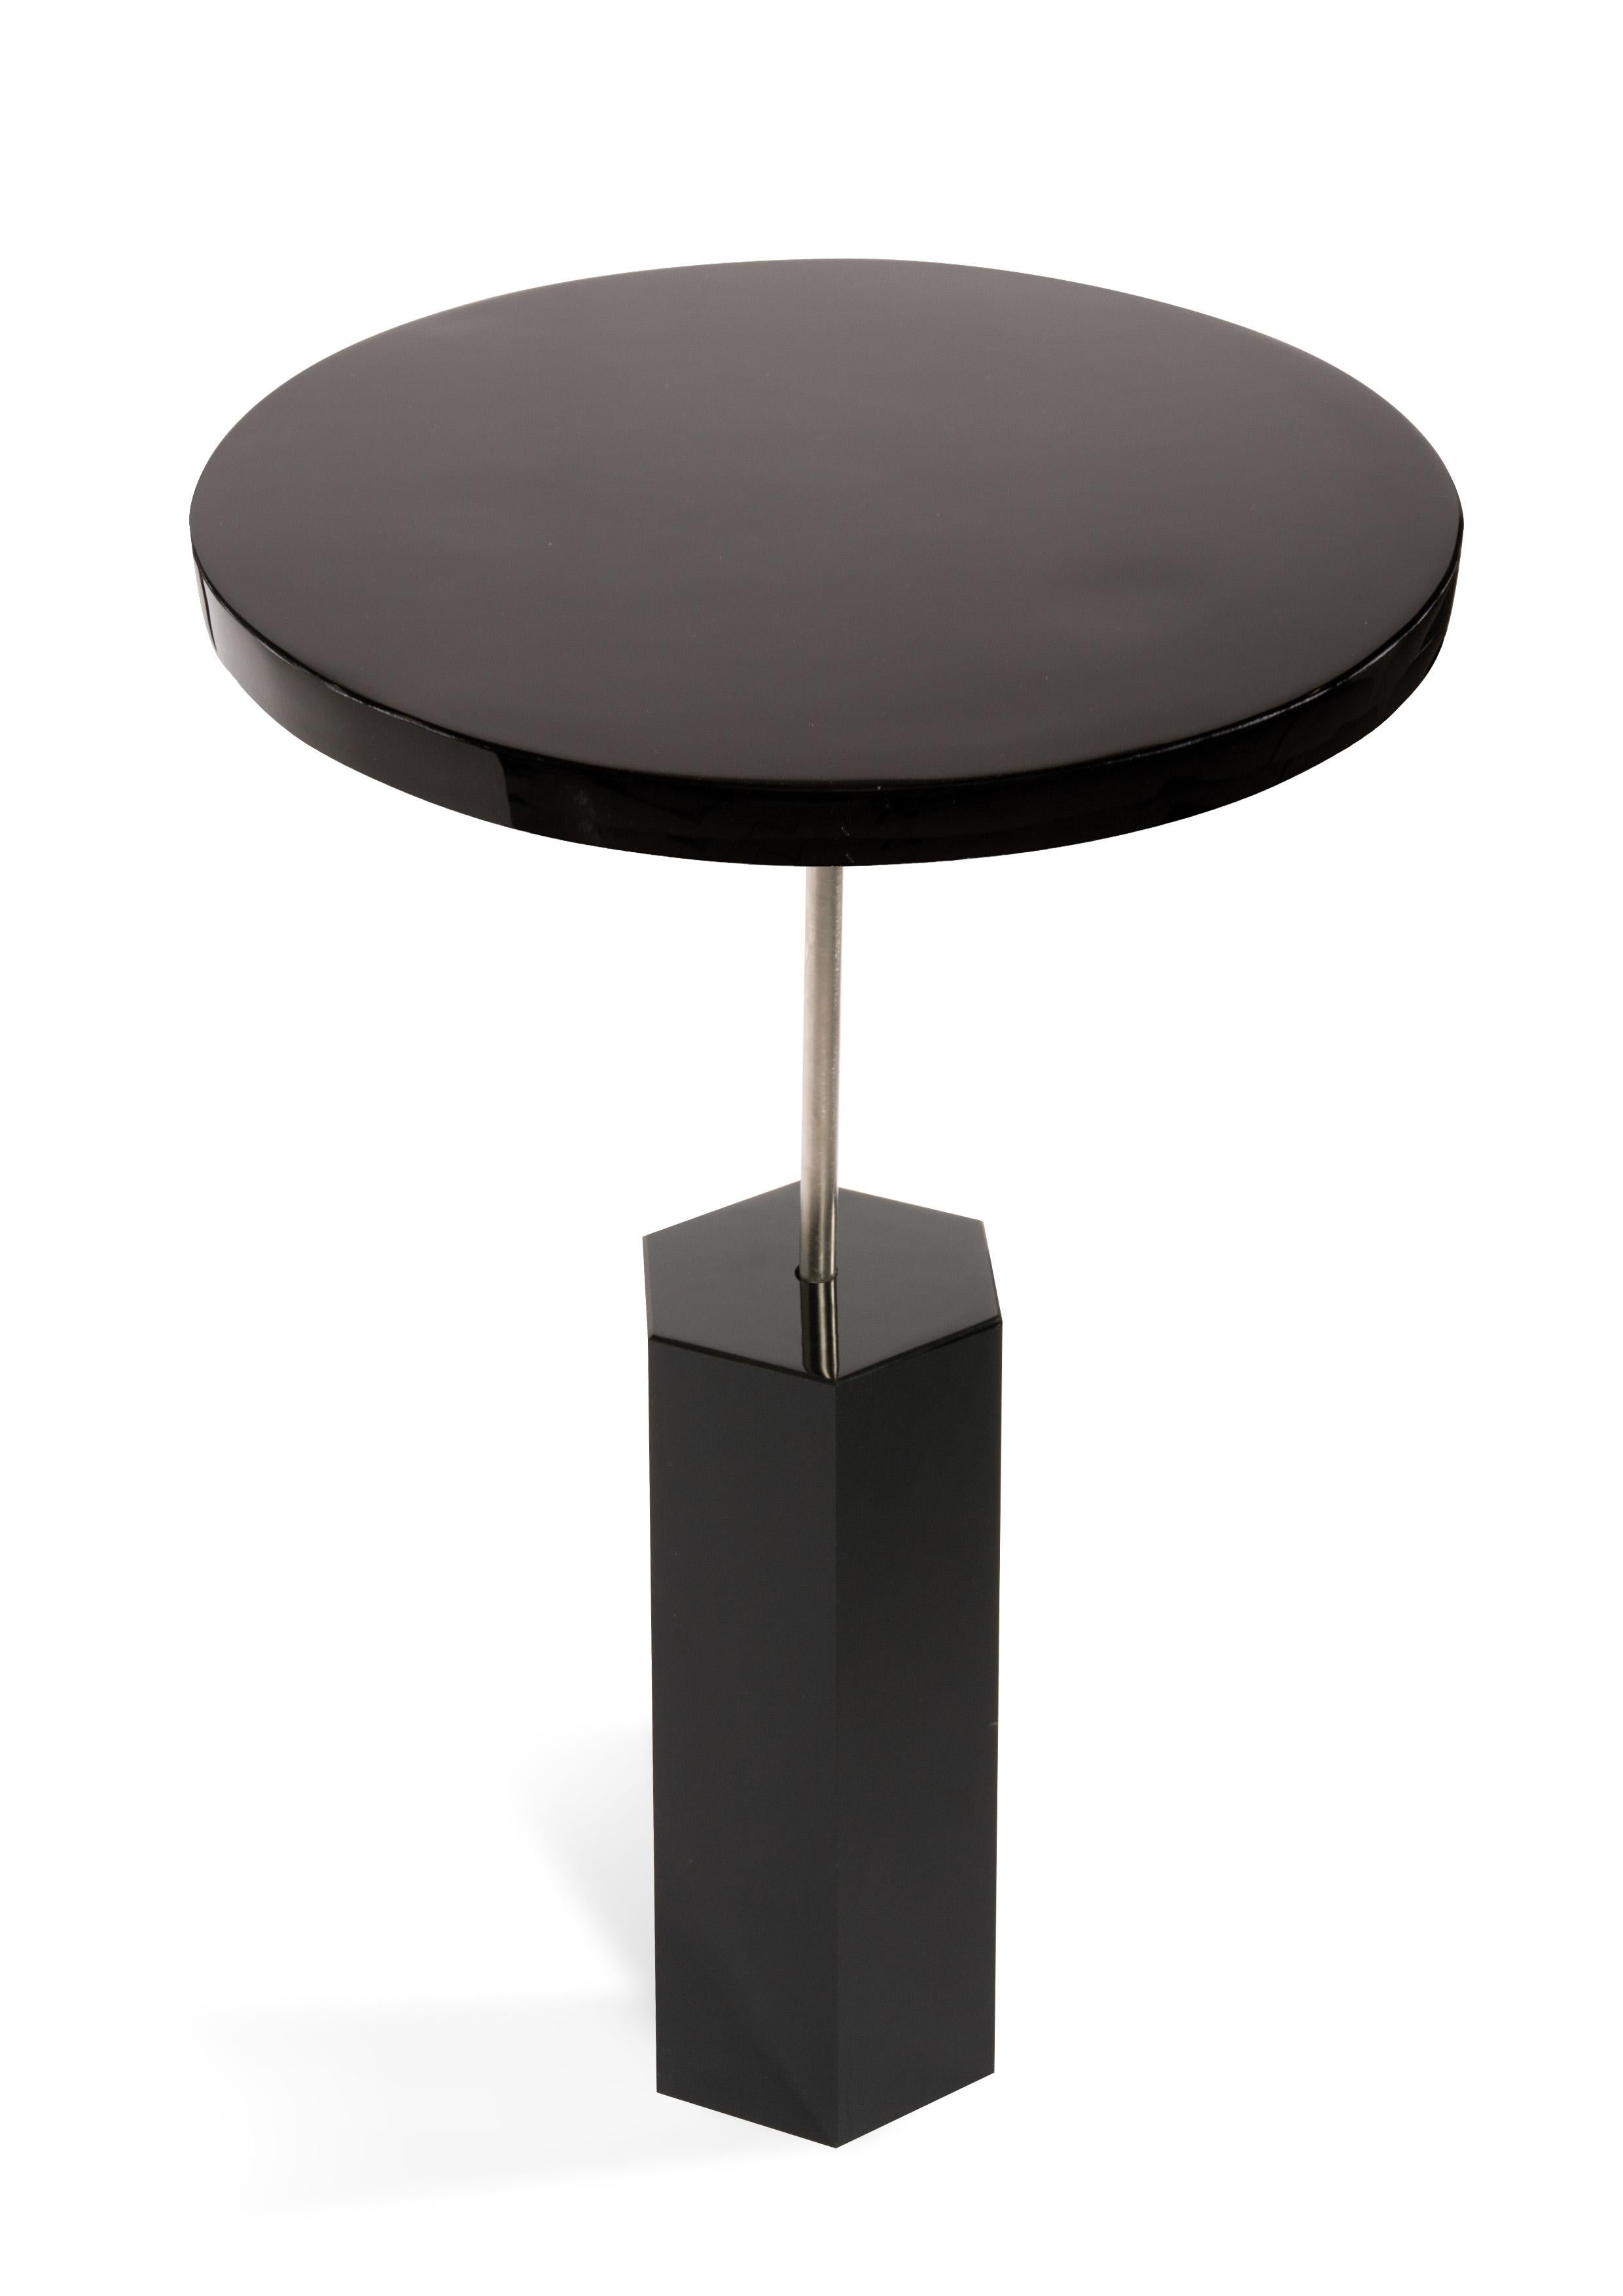 Organic Modern Configurable Geometry I Side Table by Sten Studio, REP by Tuleste Factory For Sale